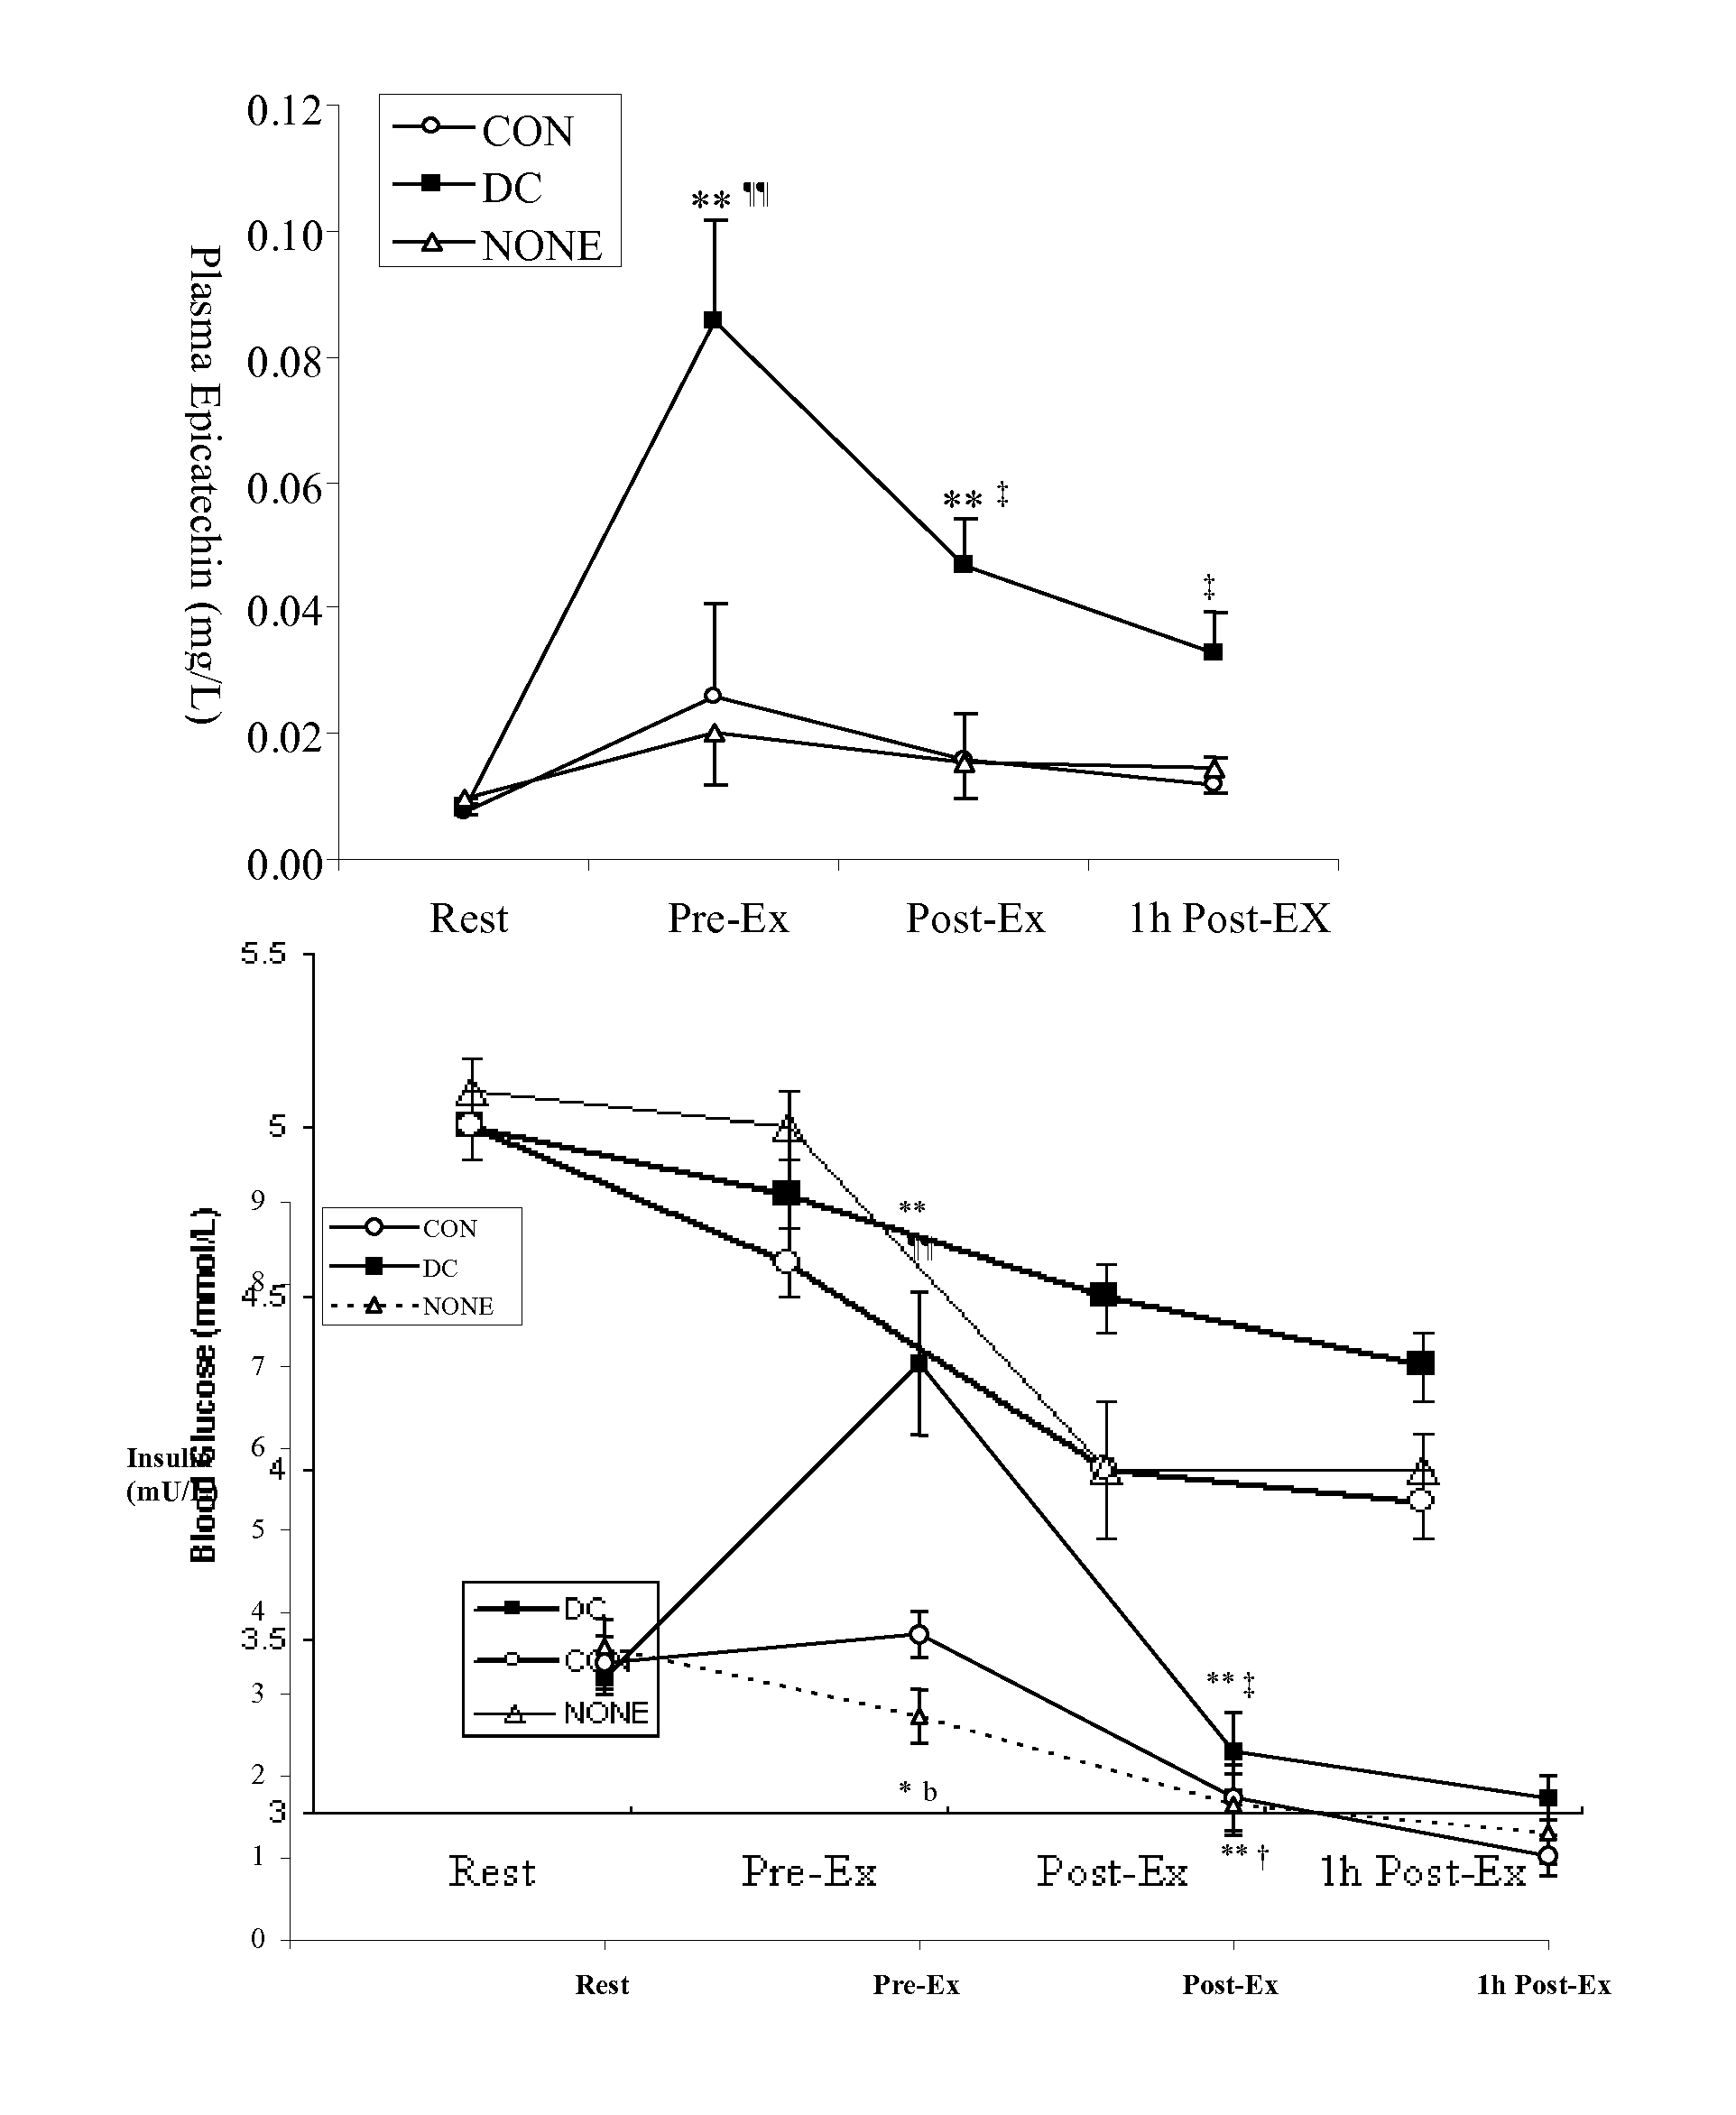 Reduction of oxidative stress damage during or after exercise